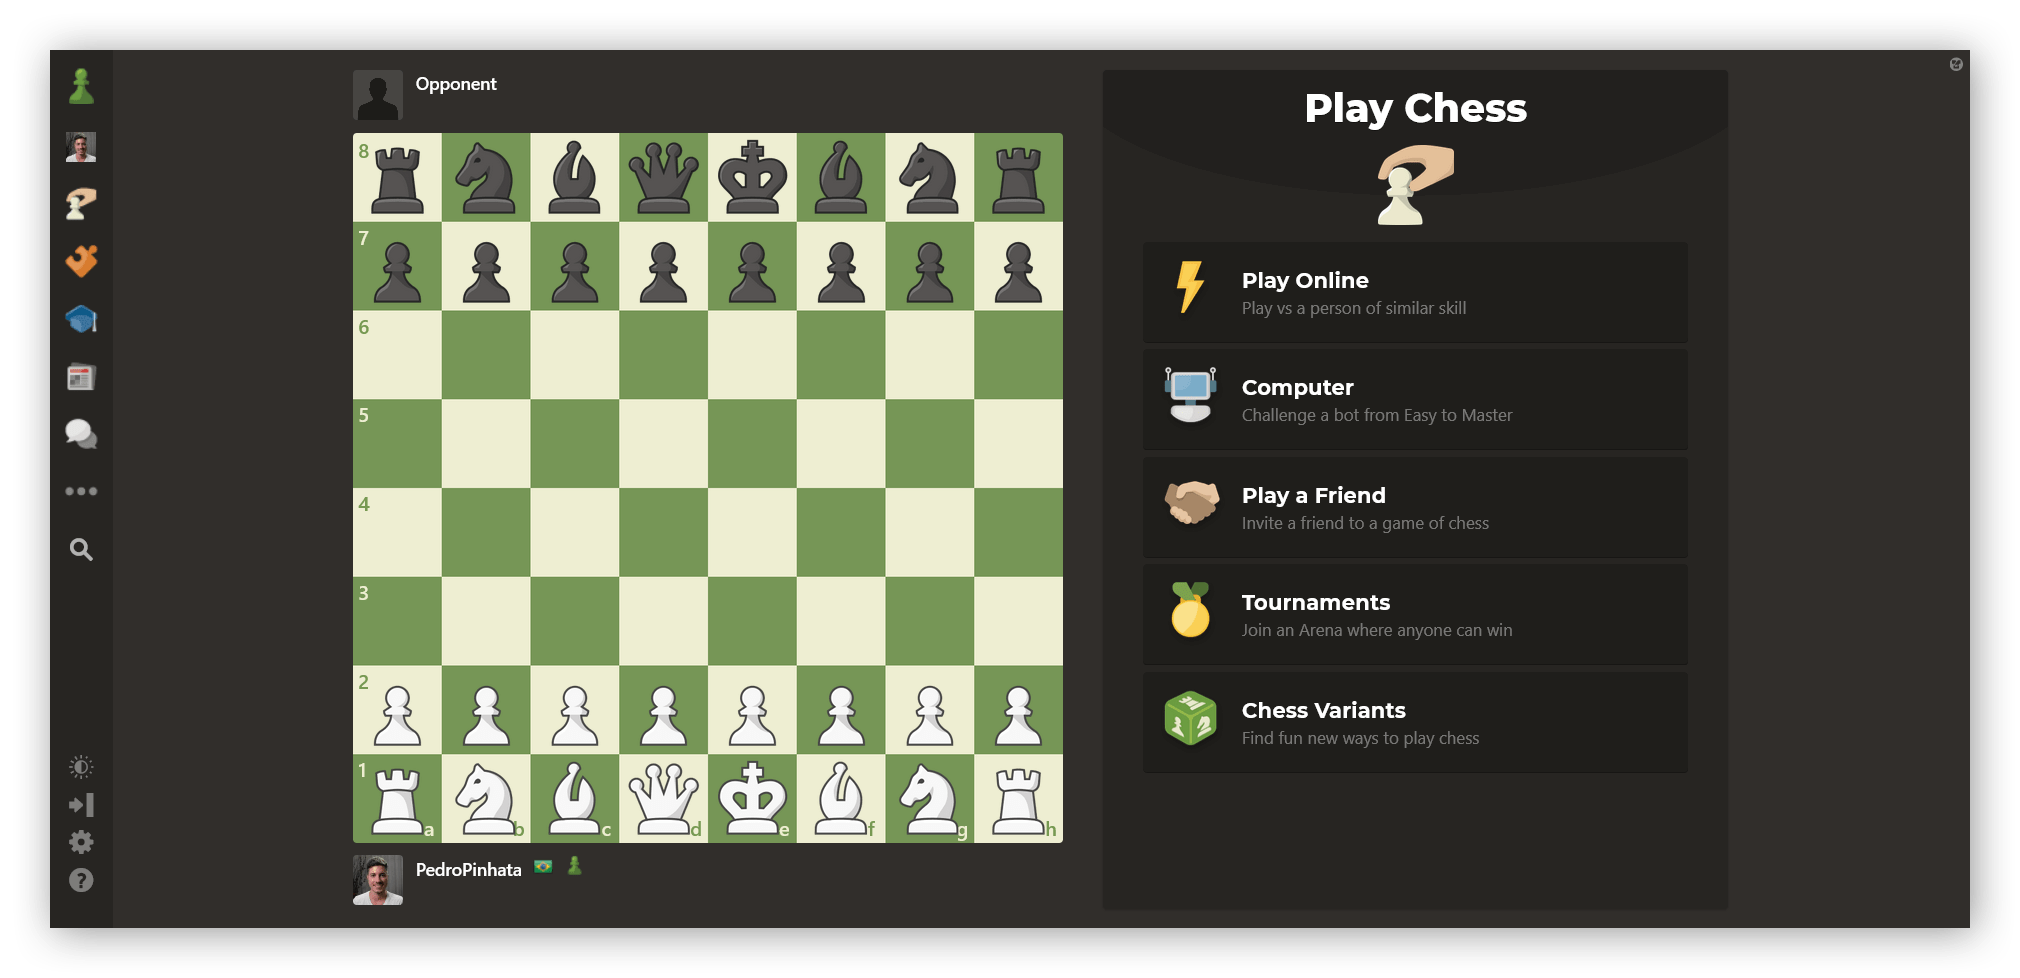 How to Analyze Your Chess Game: A Step-by-step Guide